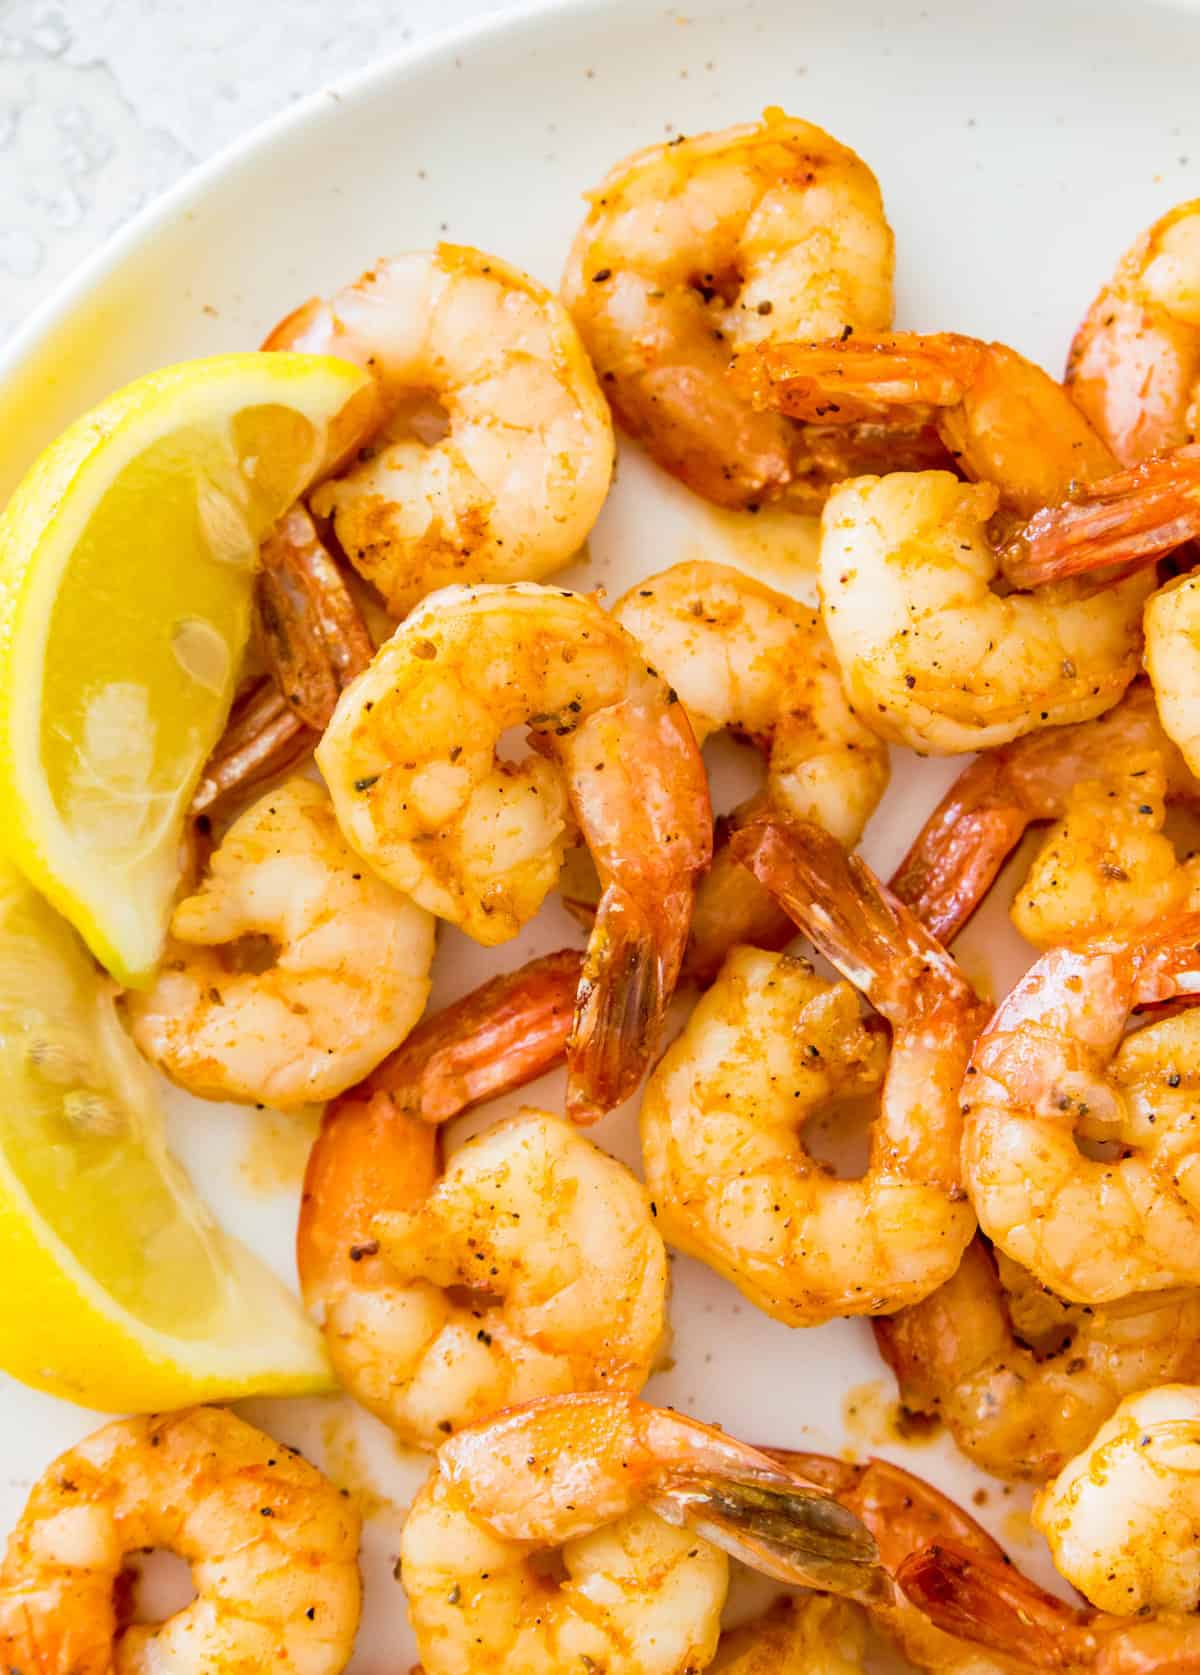 A plate of cooked shrimp with lemon wedges beside them.